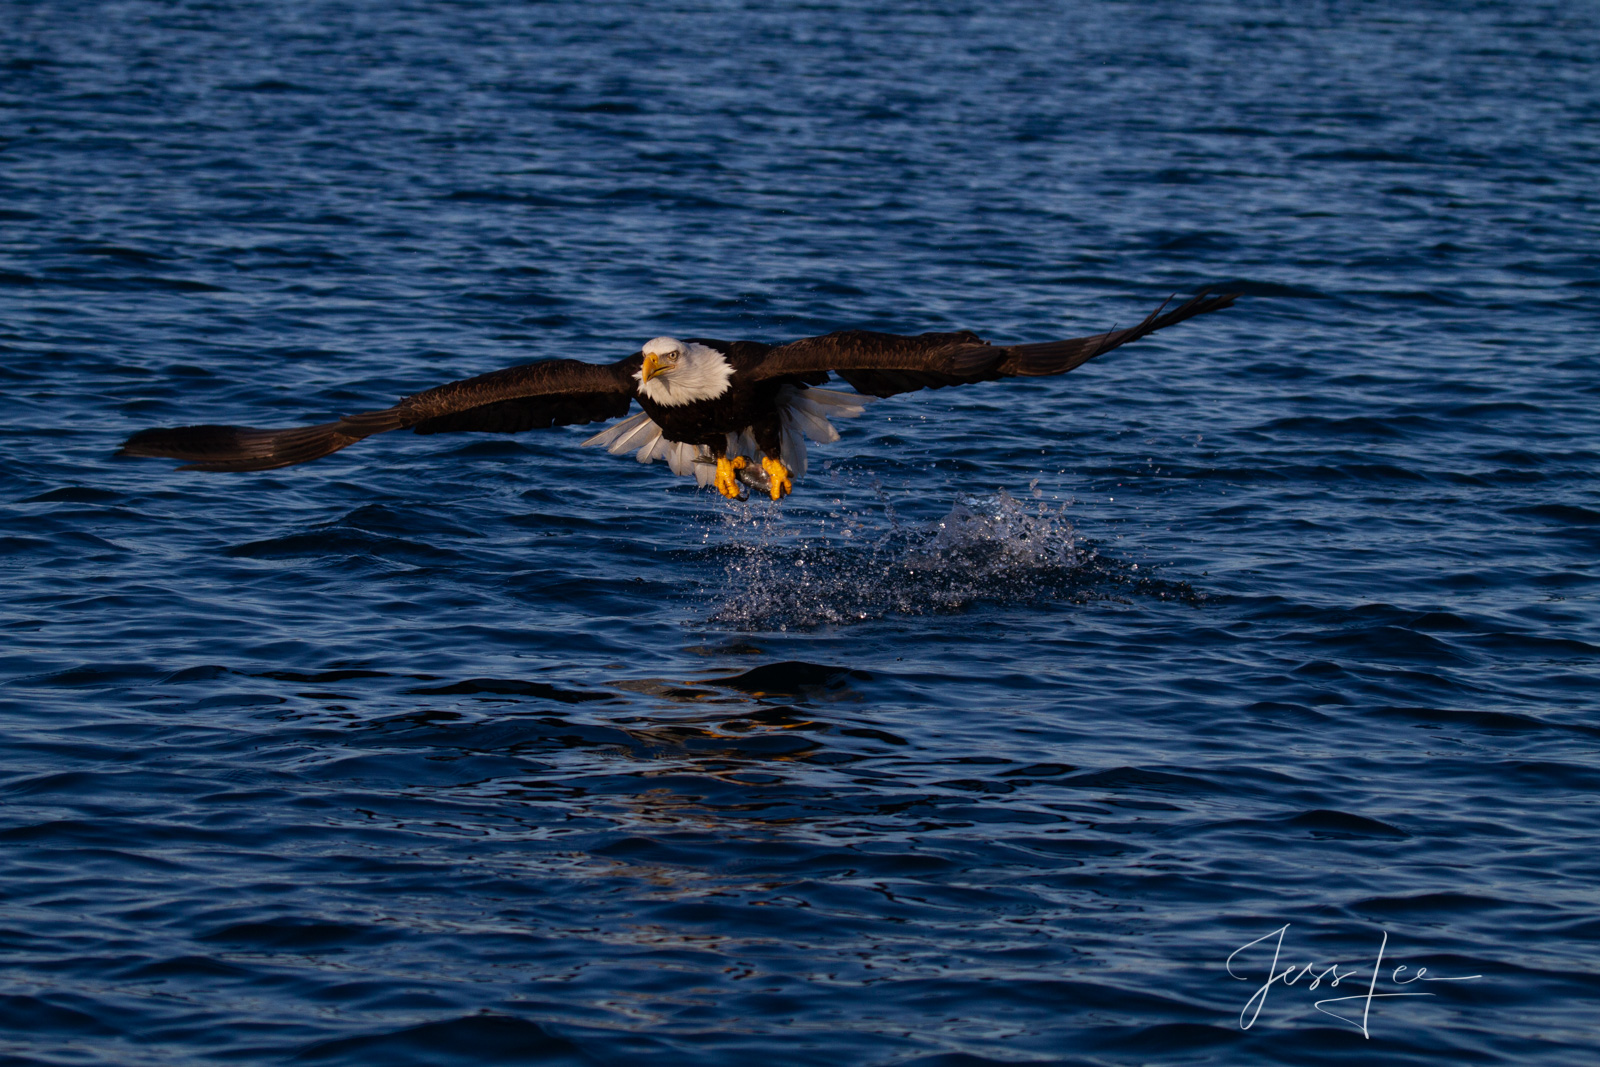 Bring home the power and beauty of the amazing fine art American Bald Eagle photograph Good Catch by Jess Lee from his Wildlife...